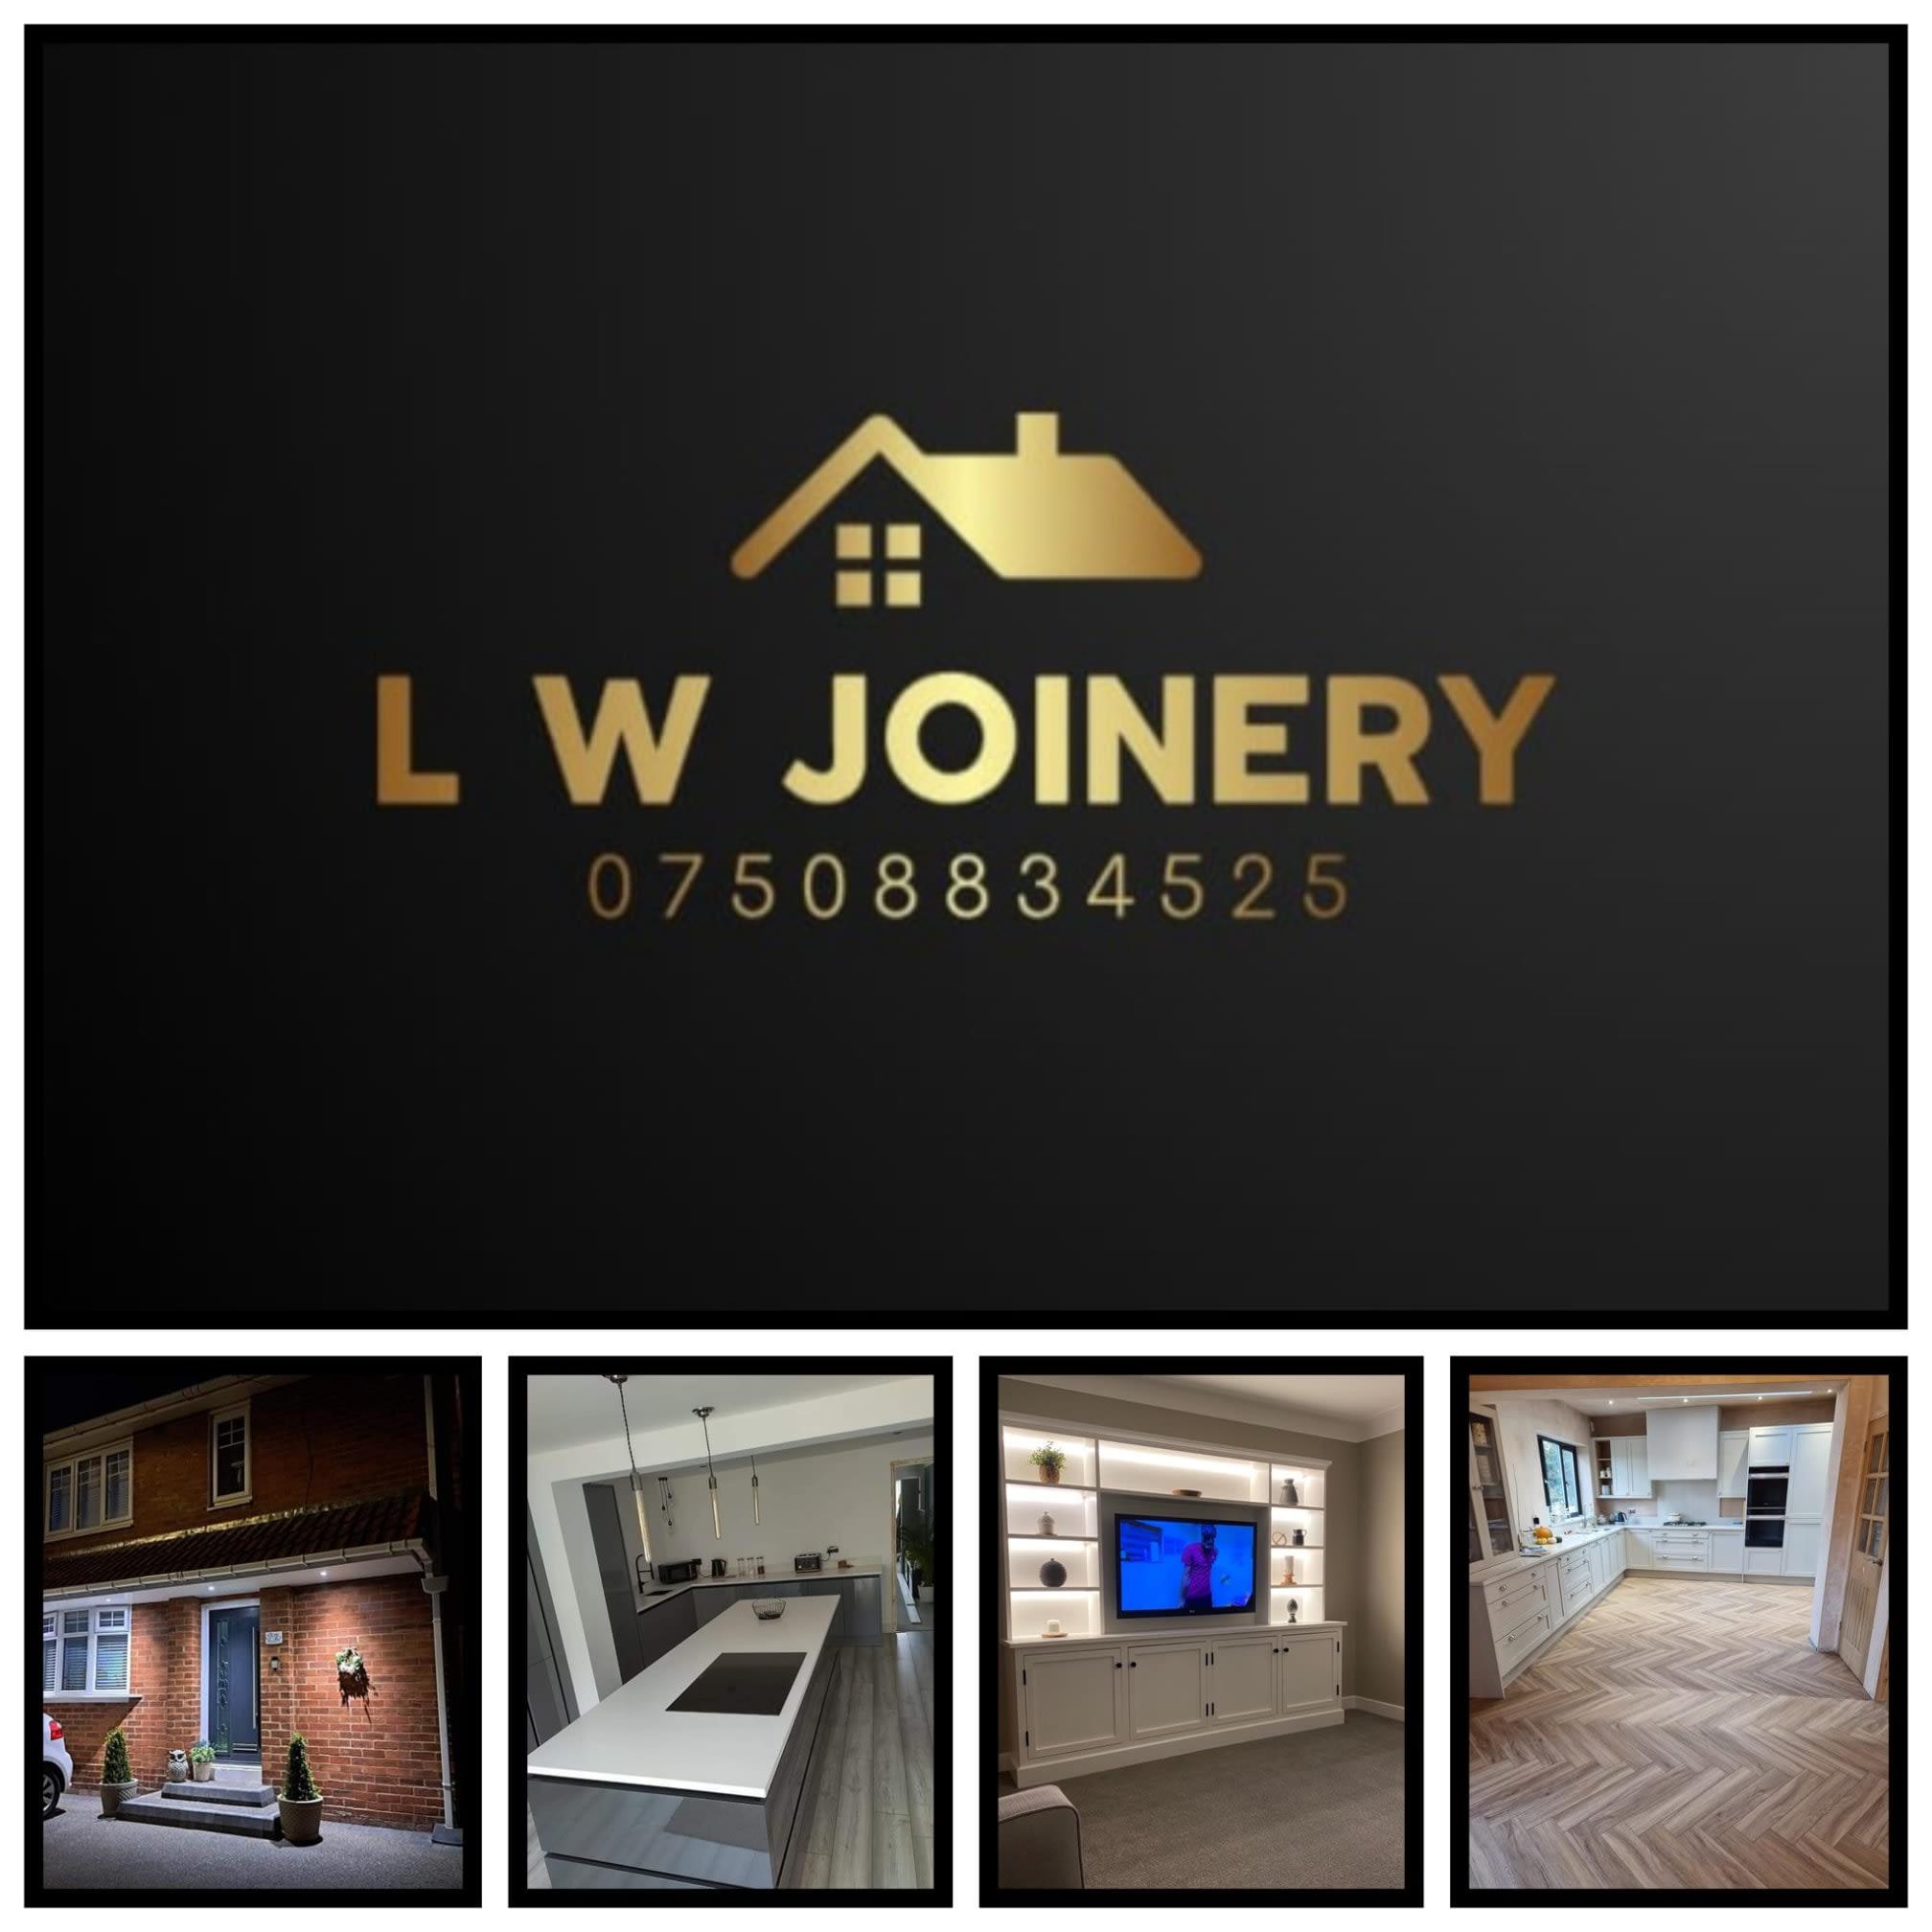 LW Joinery Logo